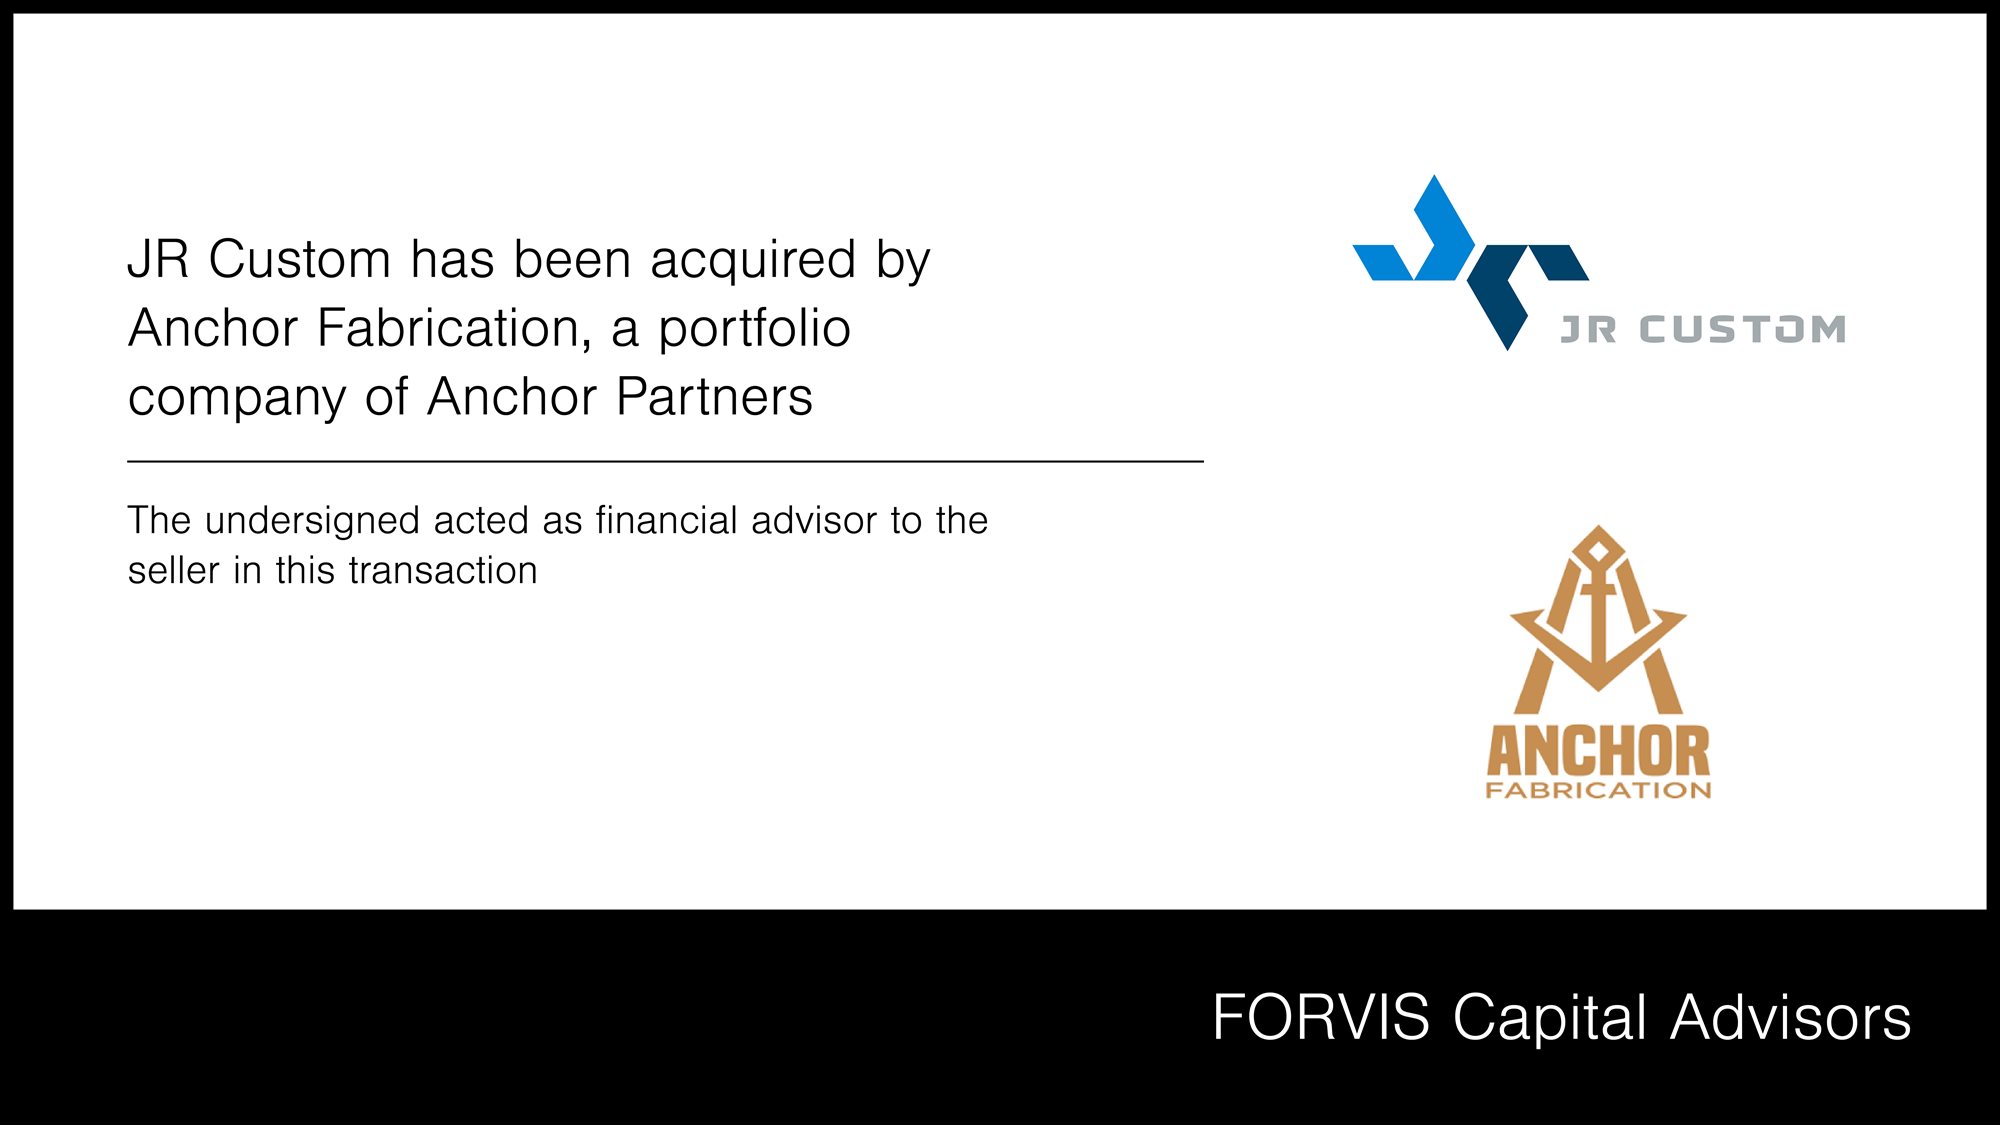 JR Custom has been acquired by Anchor Fabrication, a portfolio company of Anchor Partners | The undersigned acted as financial advisor to the seller in this transaction